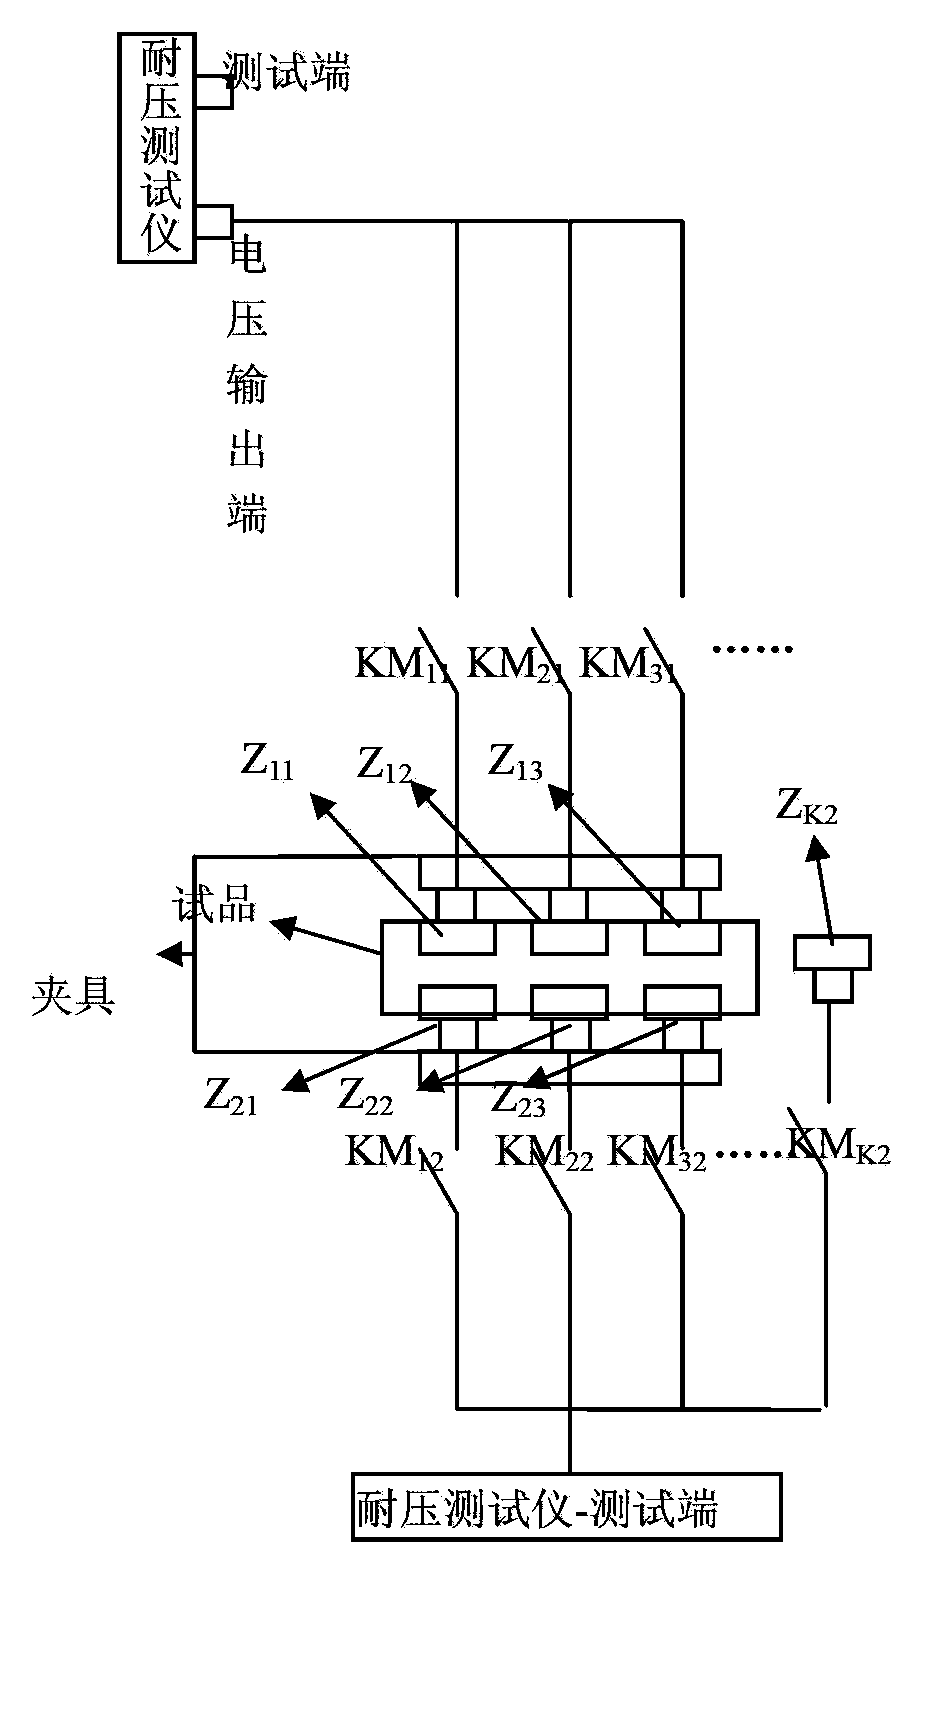 Measuring point switching device used for voltage withstanding test of low-voltage switch appliance